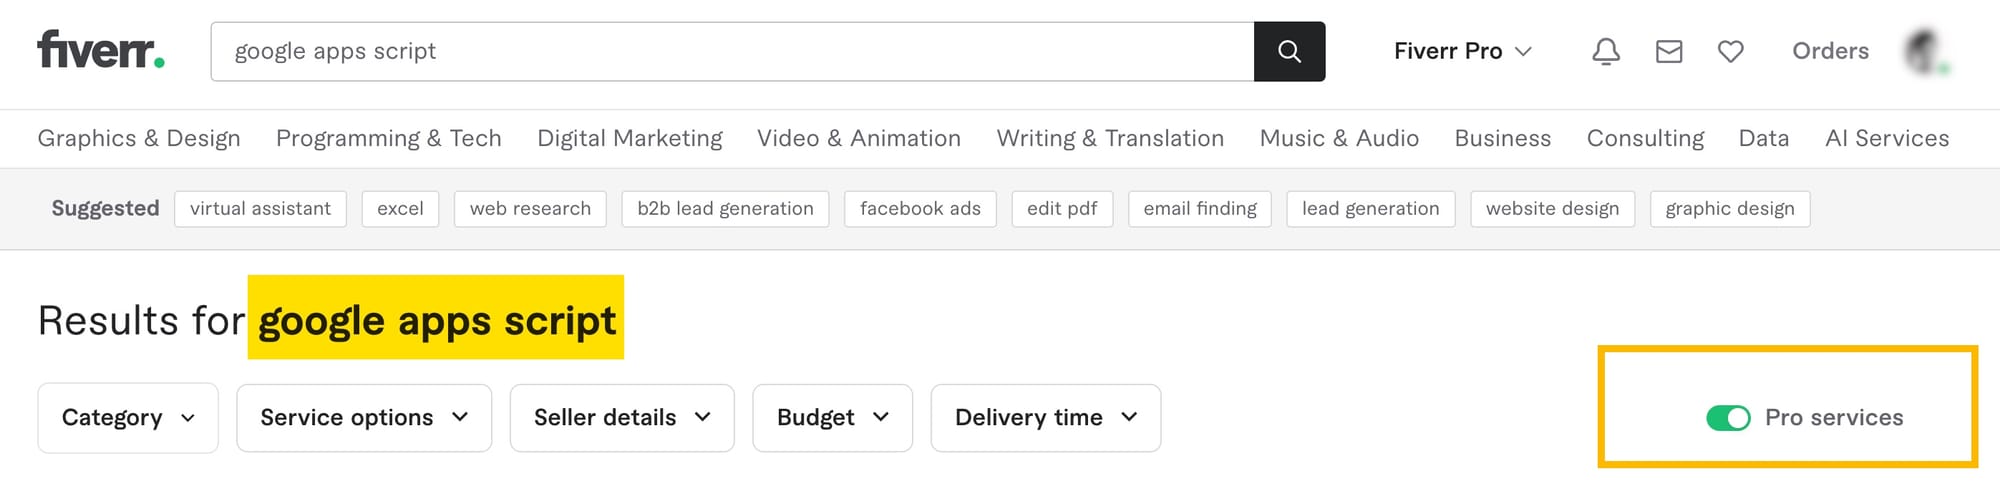 Search for Google Apps Script on Fiverr and tic the box for "Pro services."